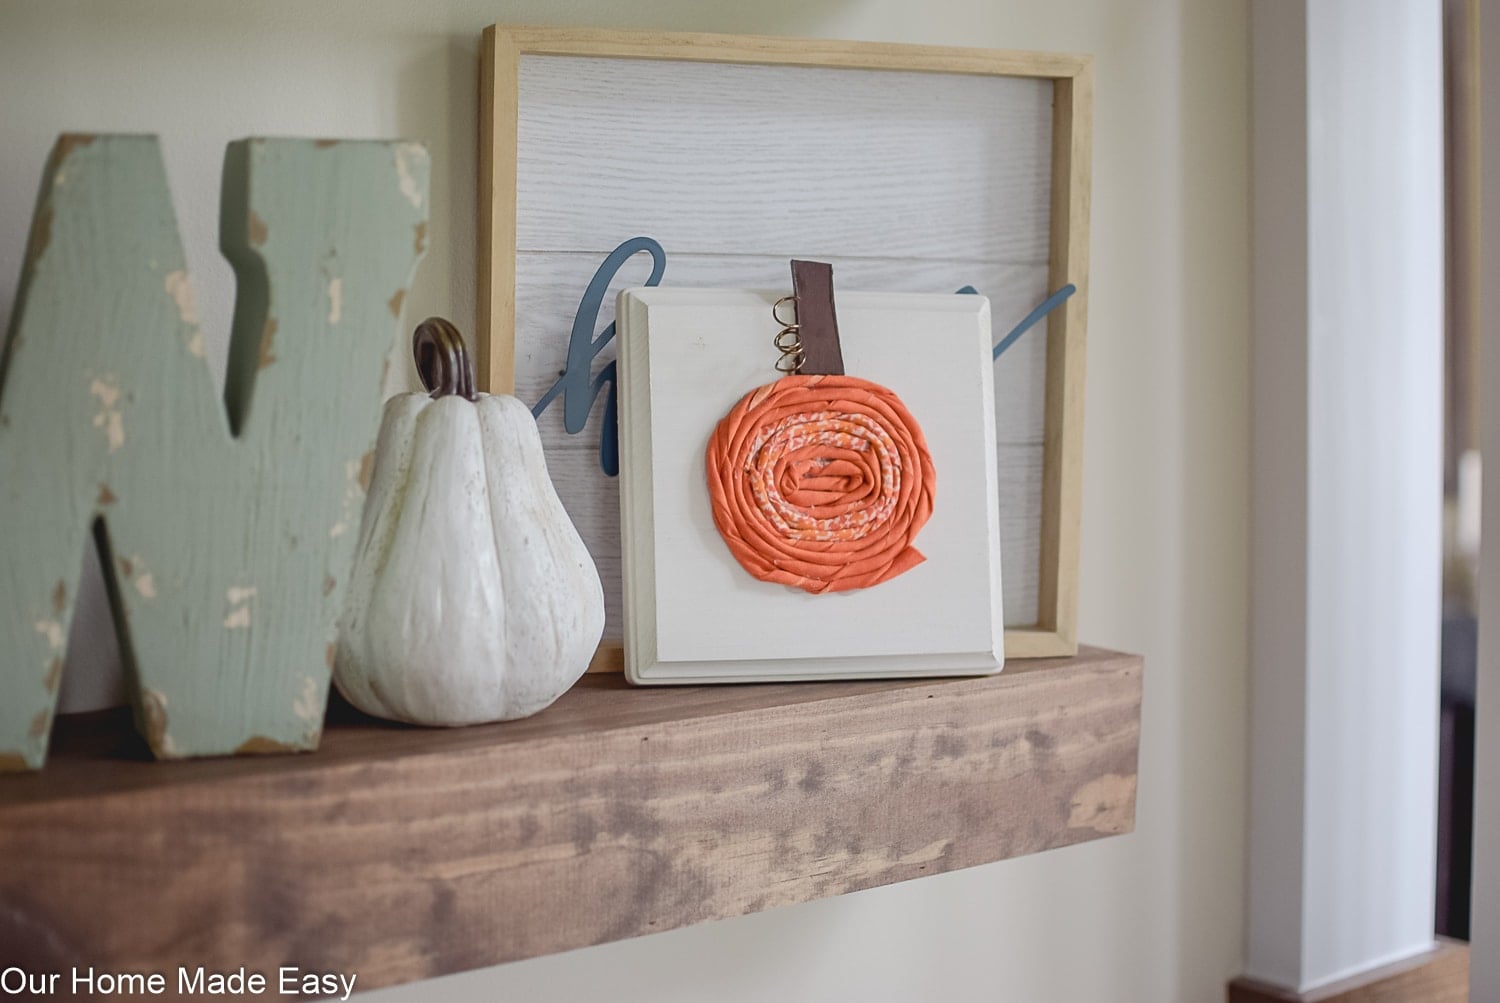 This adorable fabric pumpkin looks great along with other rustic Fall decor in your home.